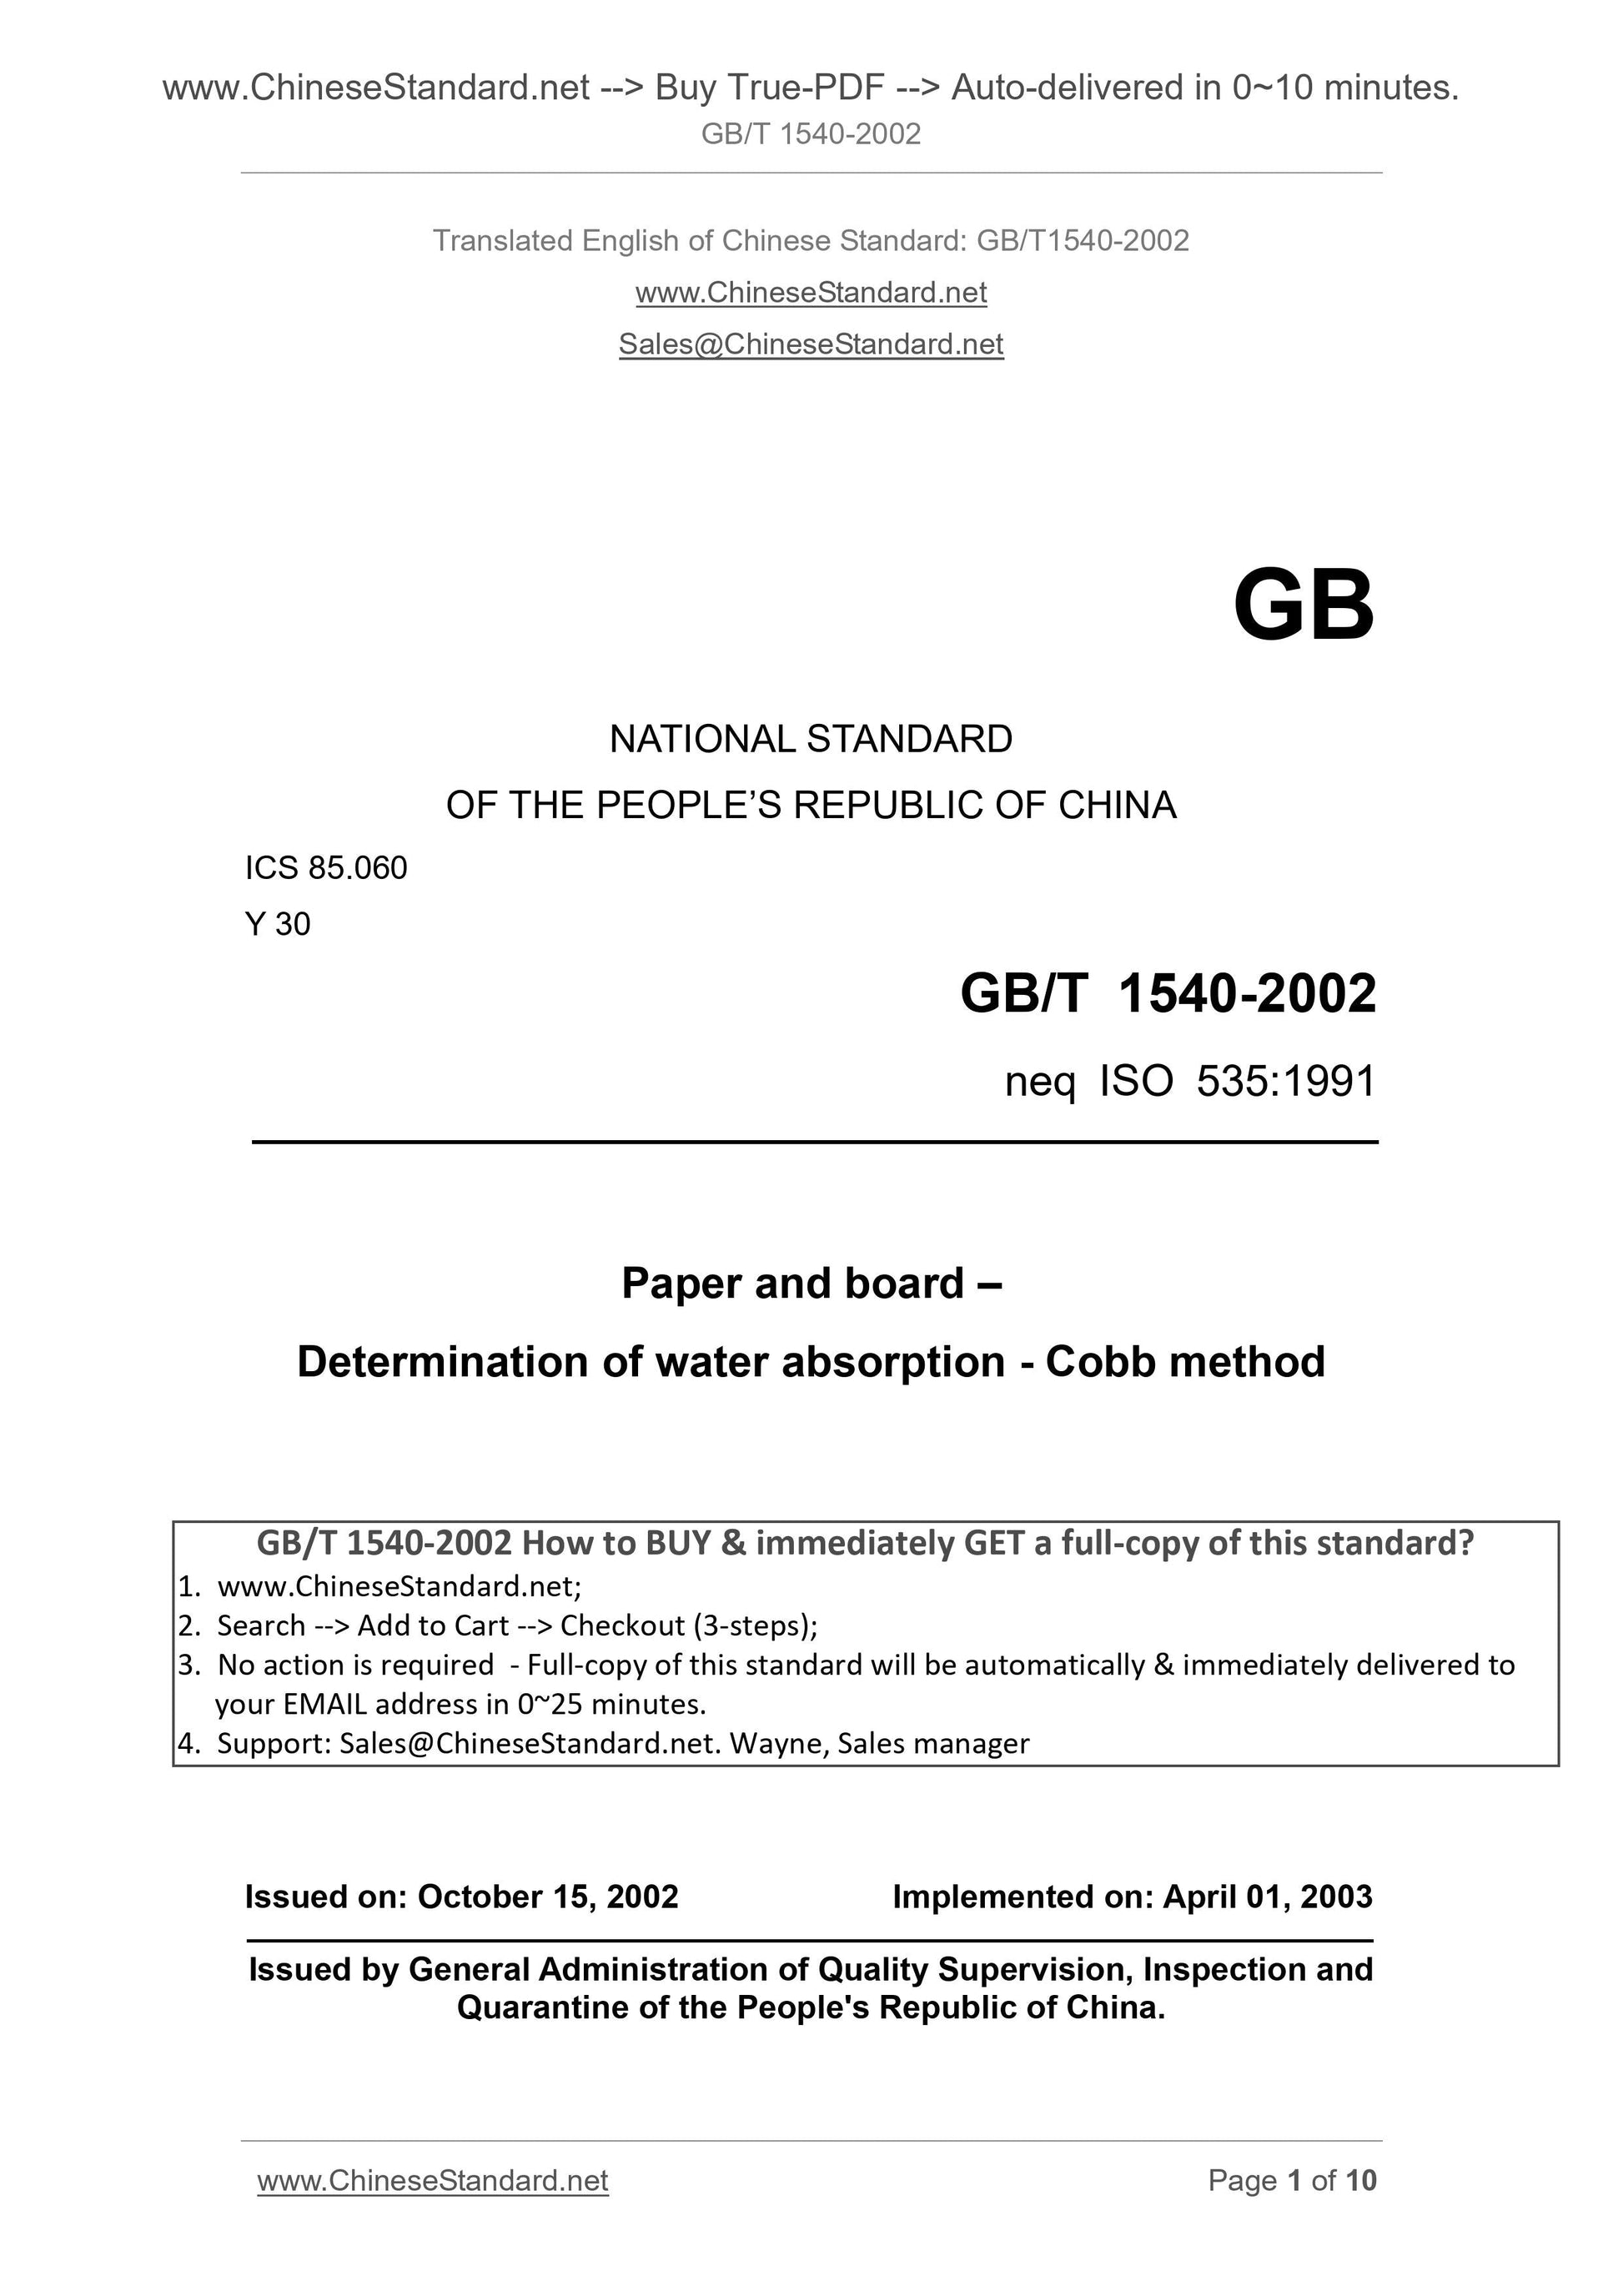 GB/T 1540-2002 Page 1